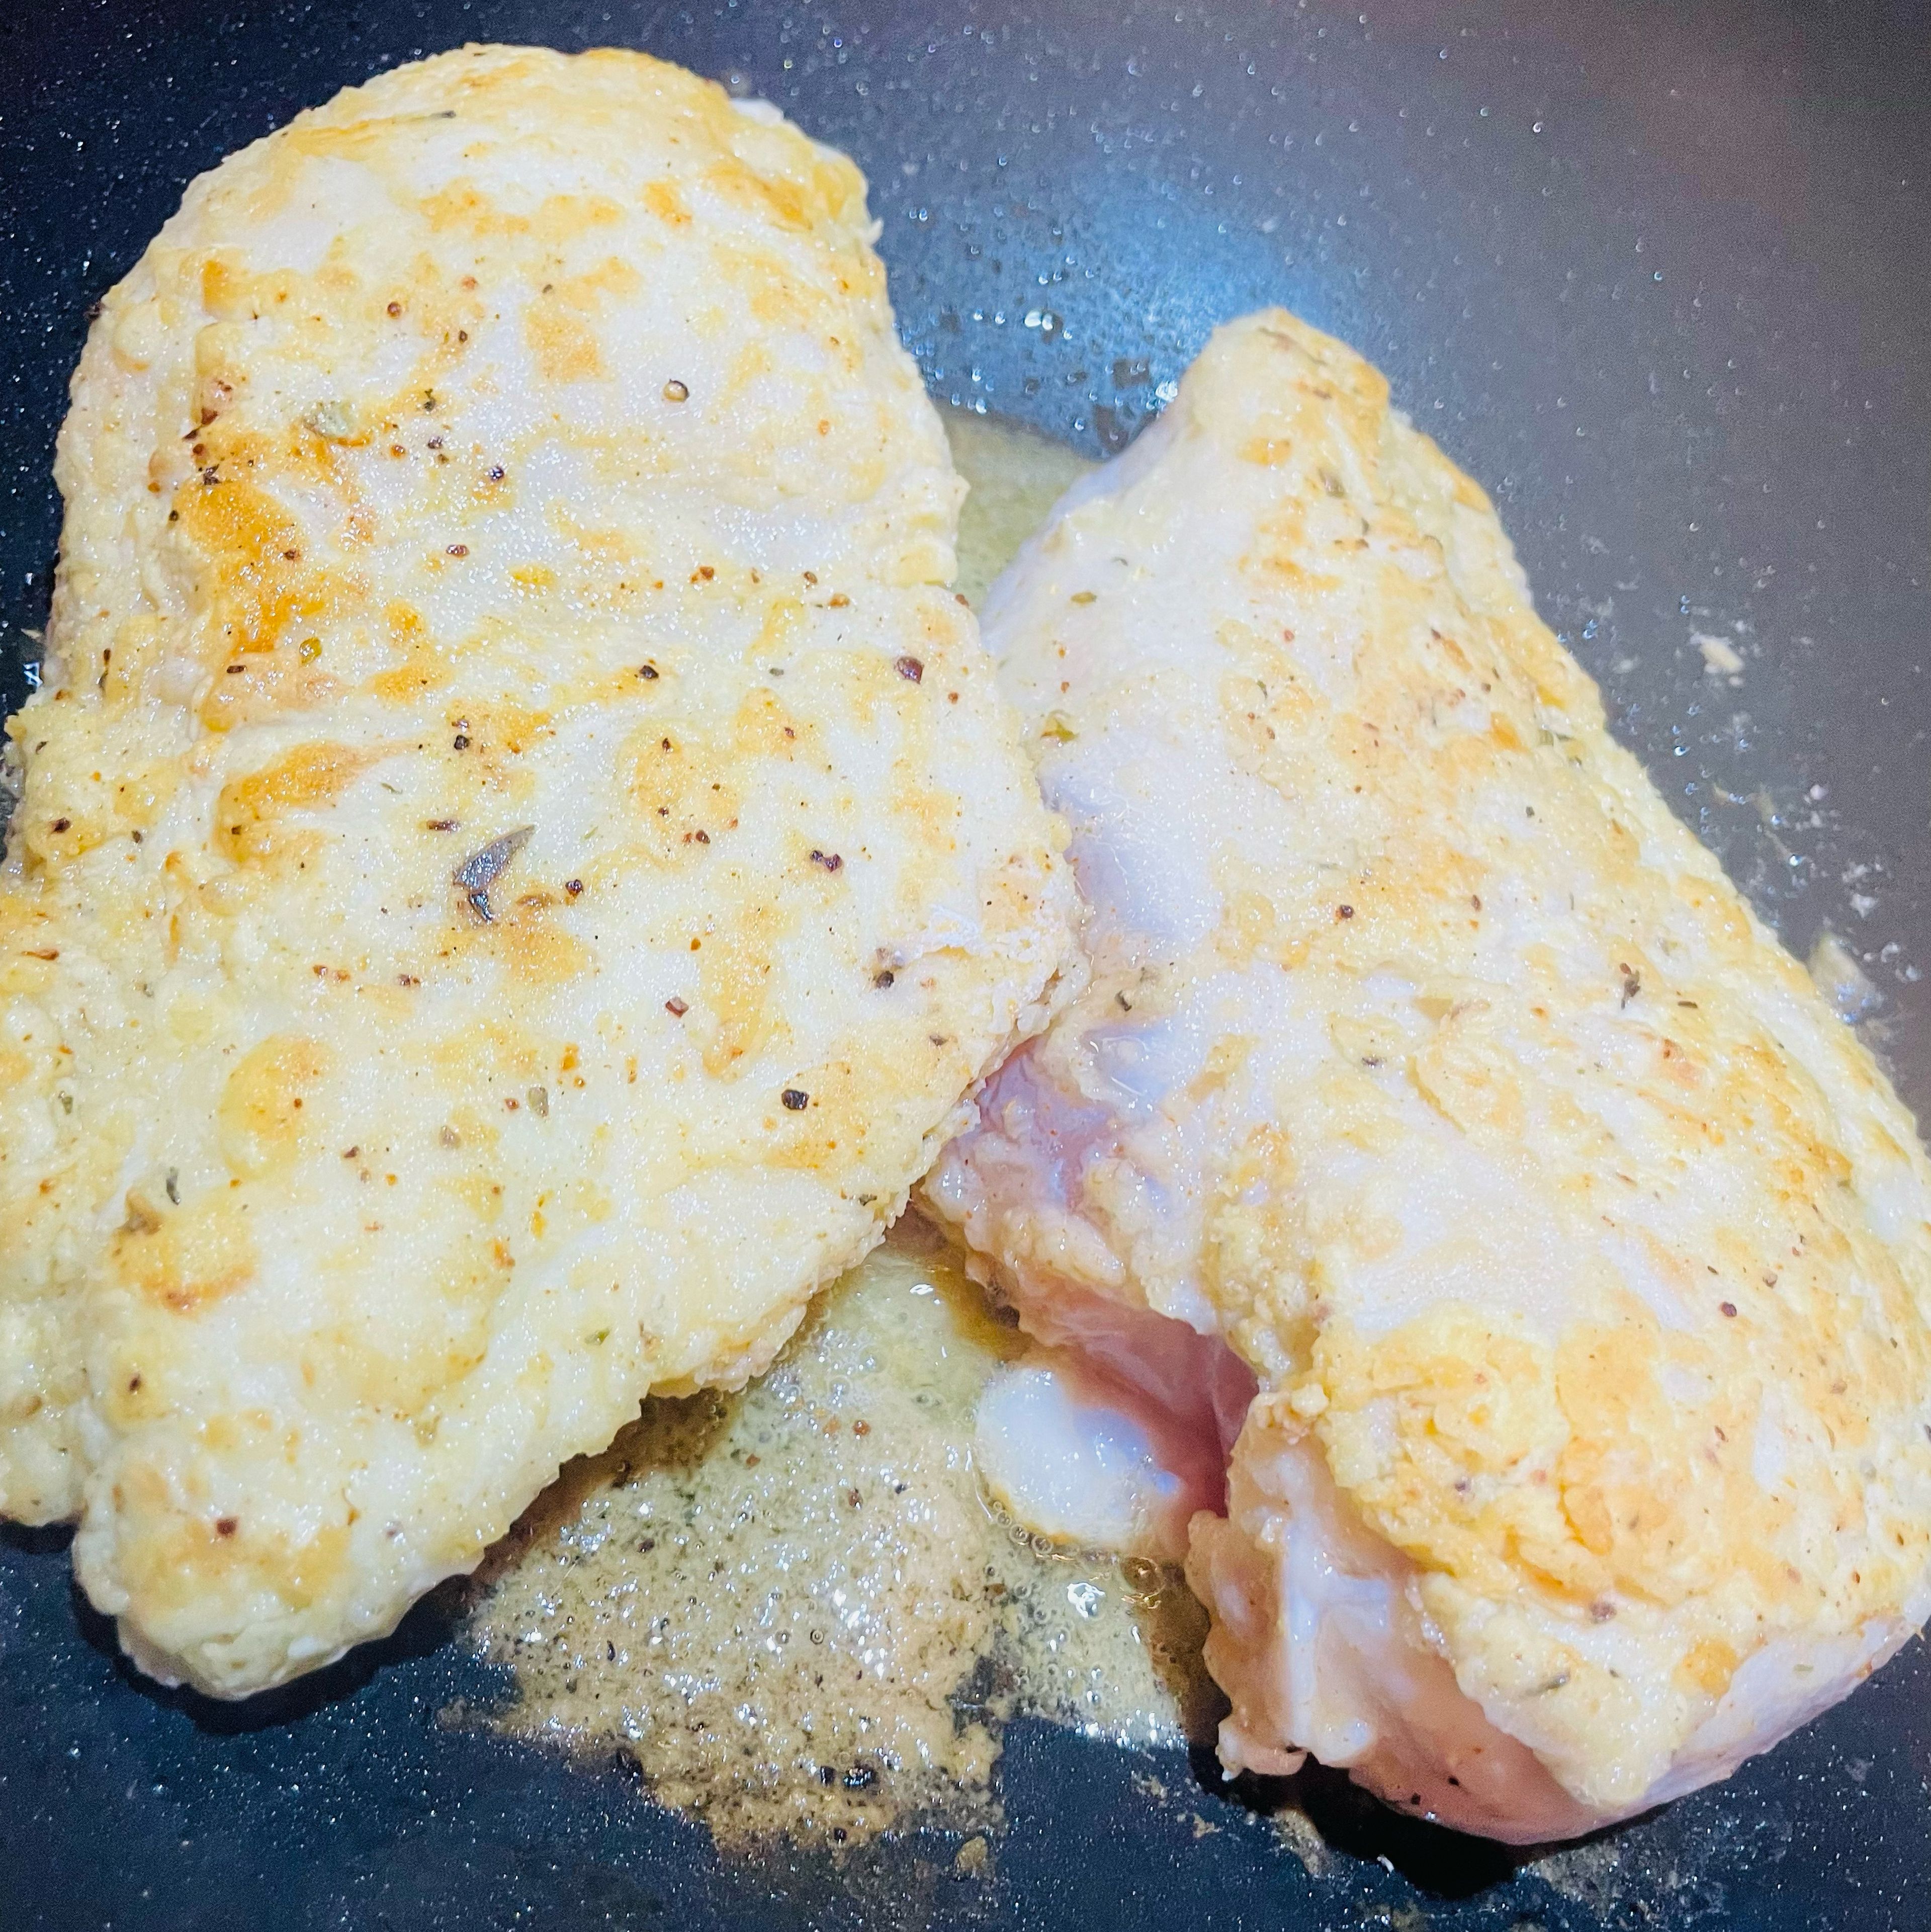 In a frying pan, heat 3 tbsp olive oil and fry chicken breast until golden brown. It takes about 5 minutes each side